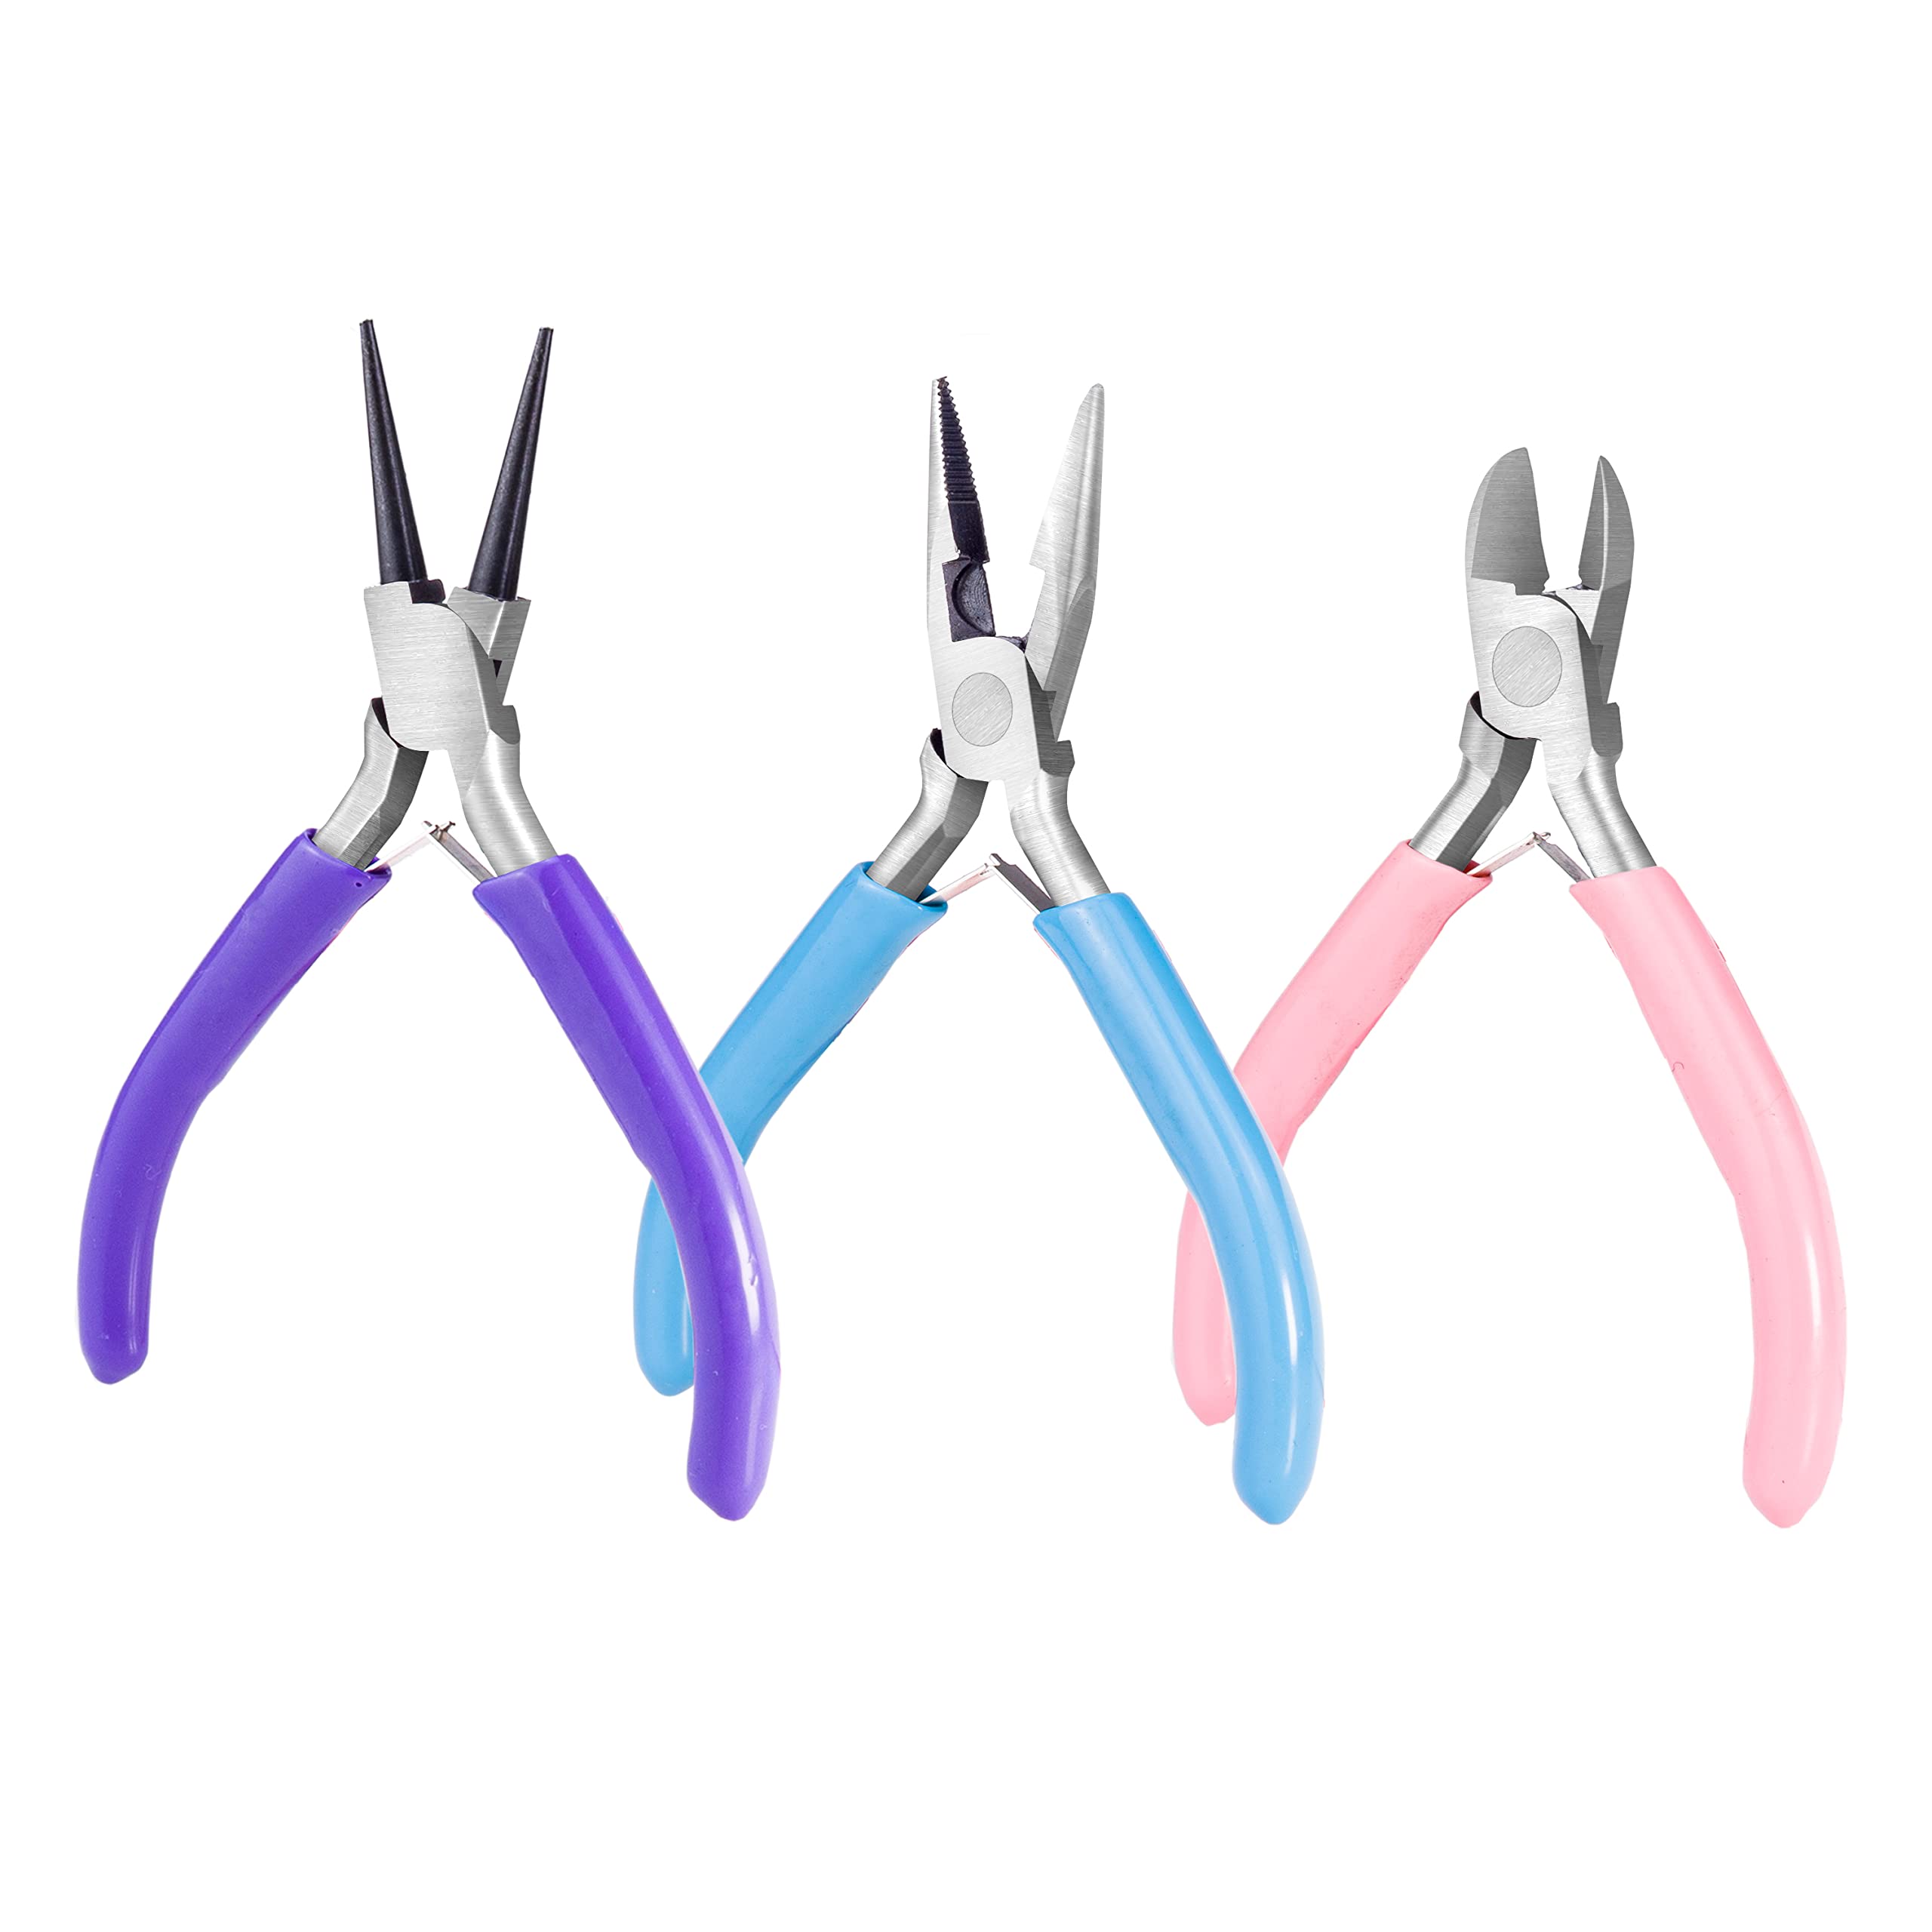 3Pcs Jewelry Pliers Jewelry Making Pliers Tools Kit with Needle Nose  Pliers/Round Nose Pliers/Chain Nose Pliers Wire Cutters for Wire Wrapping  Earring